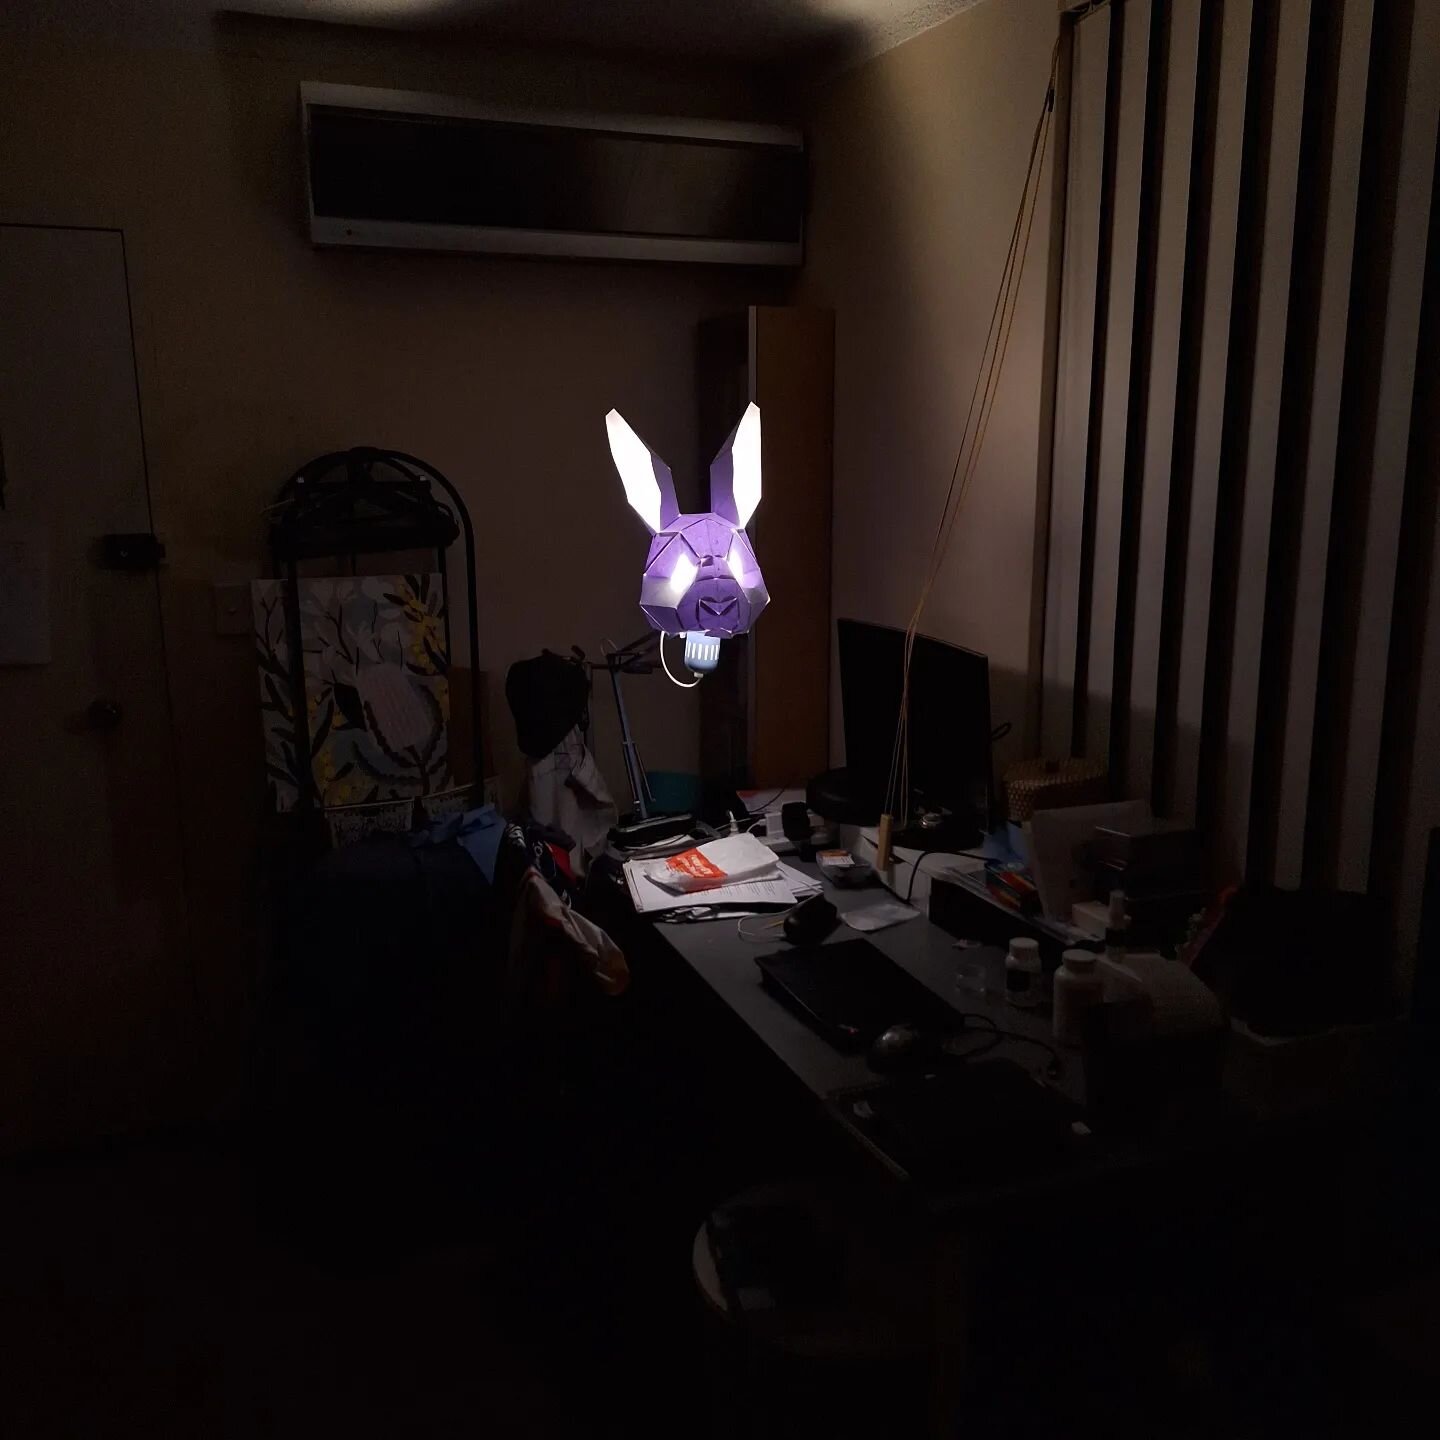 I leave Dad alone with the rabbit mask for 5 minutes and this happens. White Rabbit Red Rabbit performed by @shayanaskari13 for one night only March 13 at @riversideparra produced by myself with @ntofp . Link in bio.